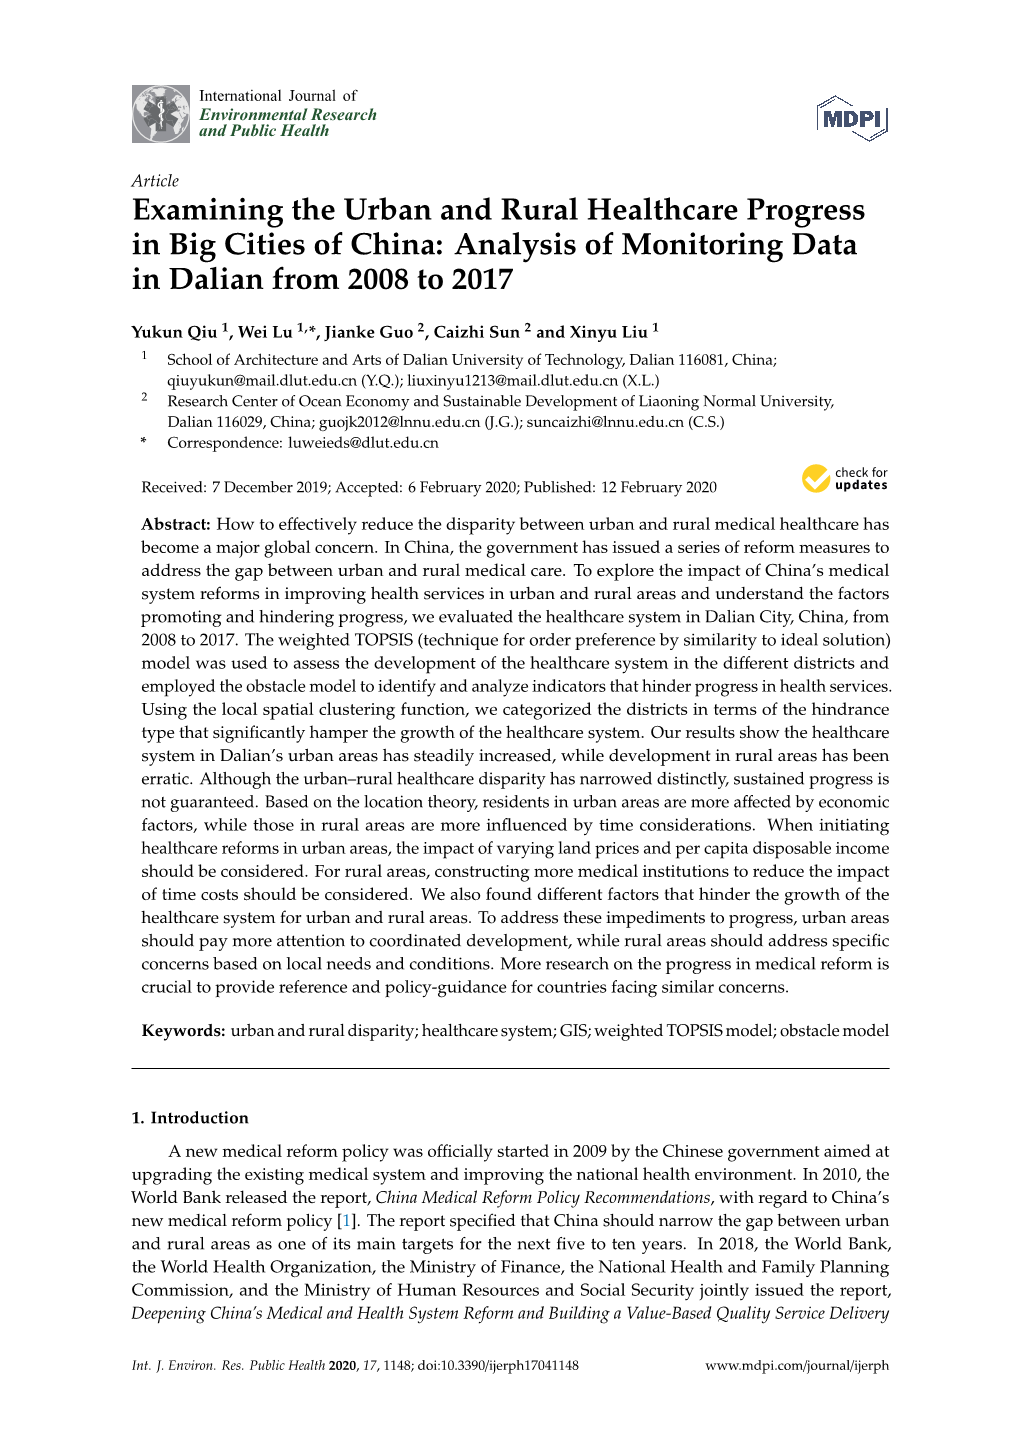 Examining the Urban and Rural Healthcare Progress in Big Cities of China: Analysis of Monitoring Data in Dalian from 2008 to 2017